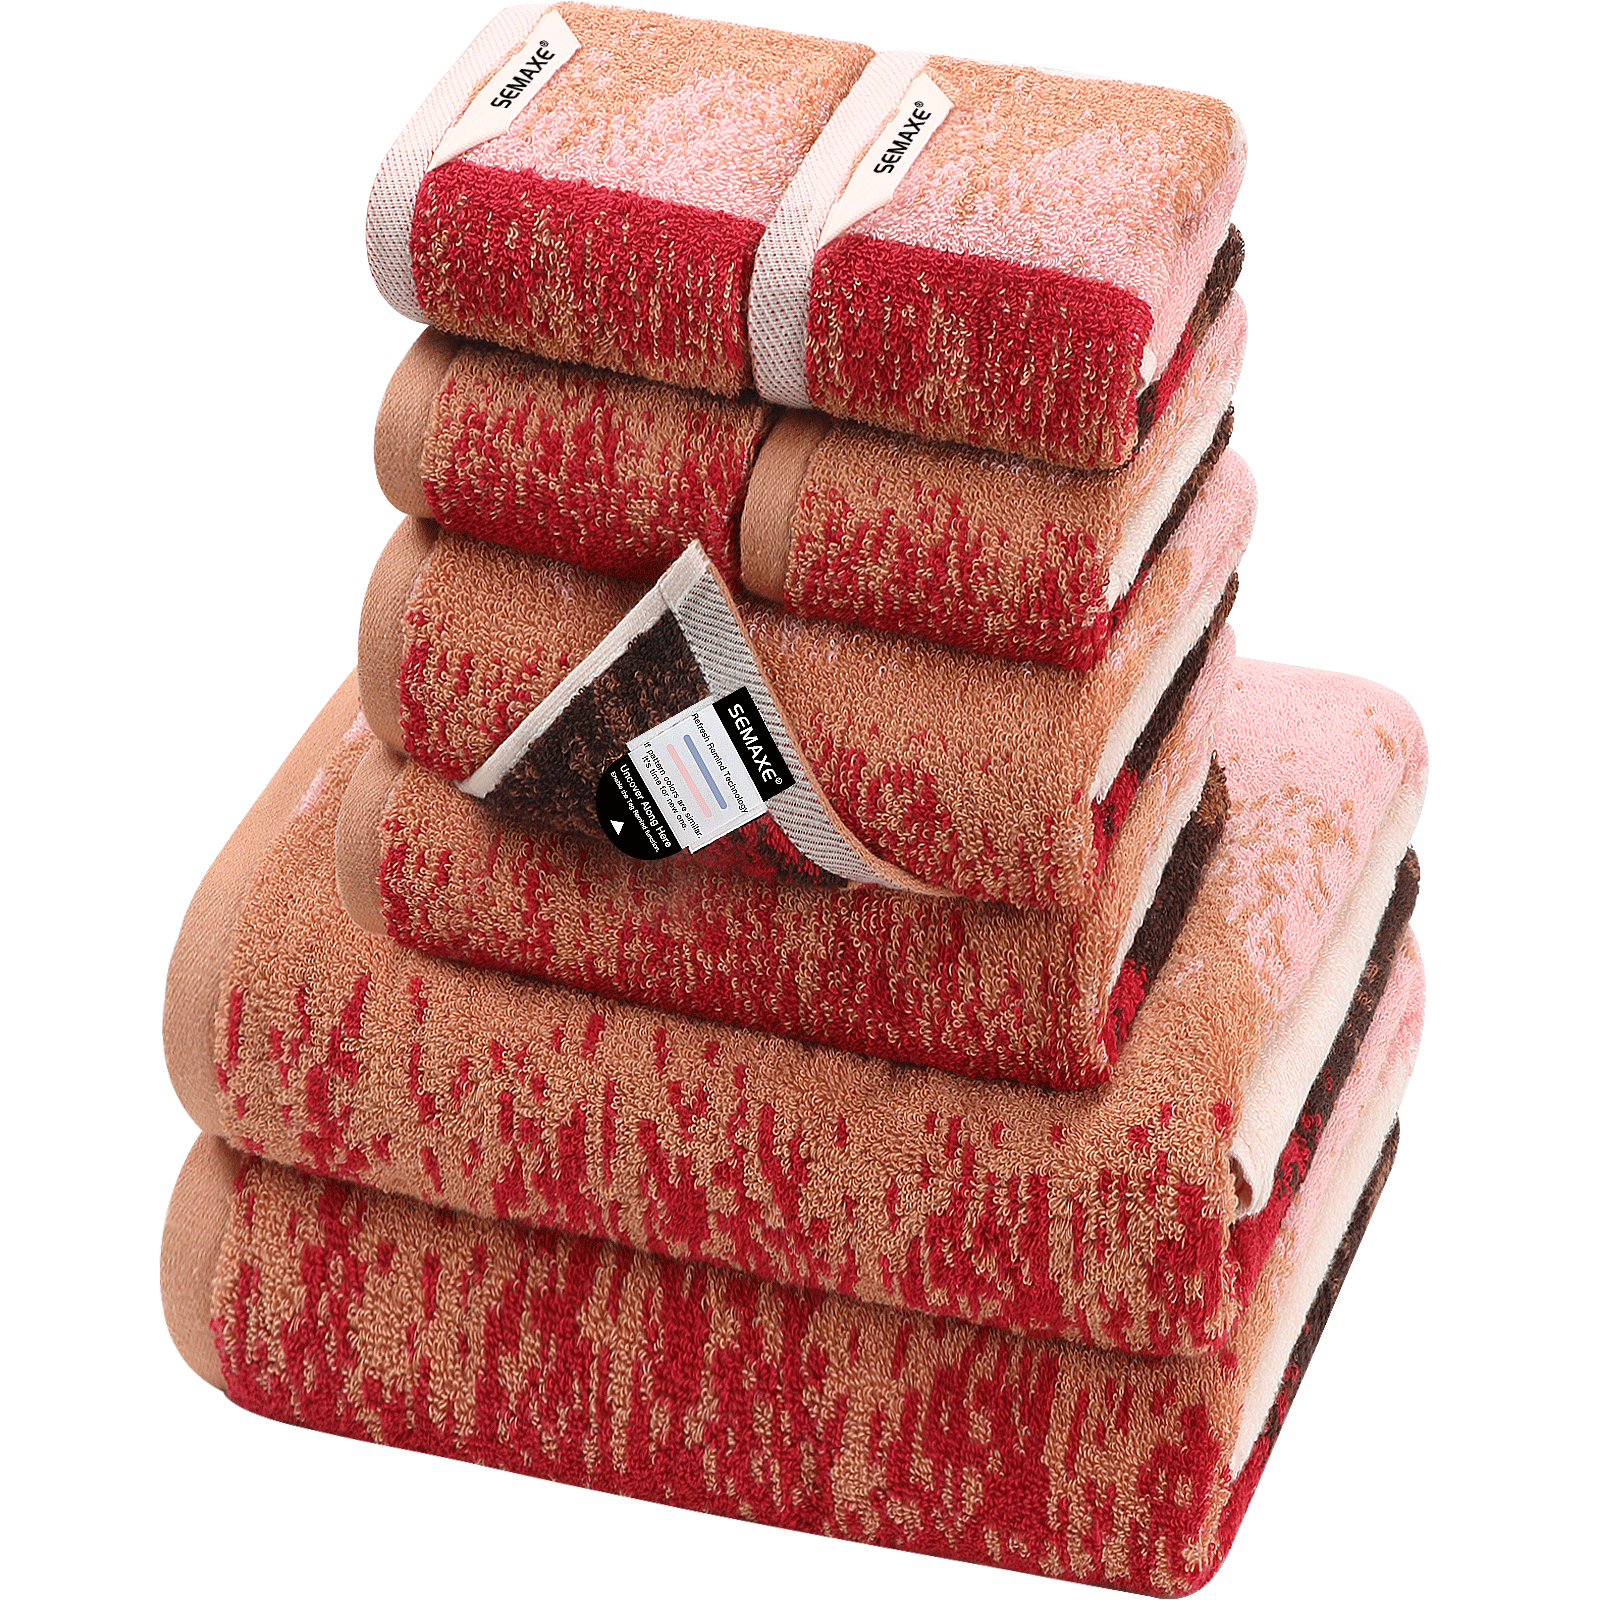 SEMAXE Soft Towels Set 100%Cotton,Bath Towel, Hand Towel,Washcloth,Highly  Absorbent, Hotel Quality